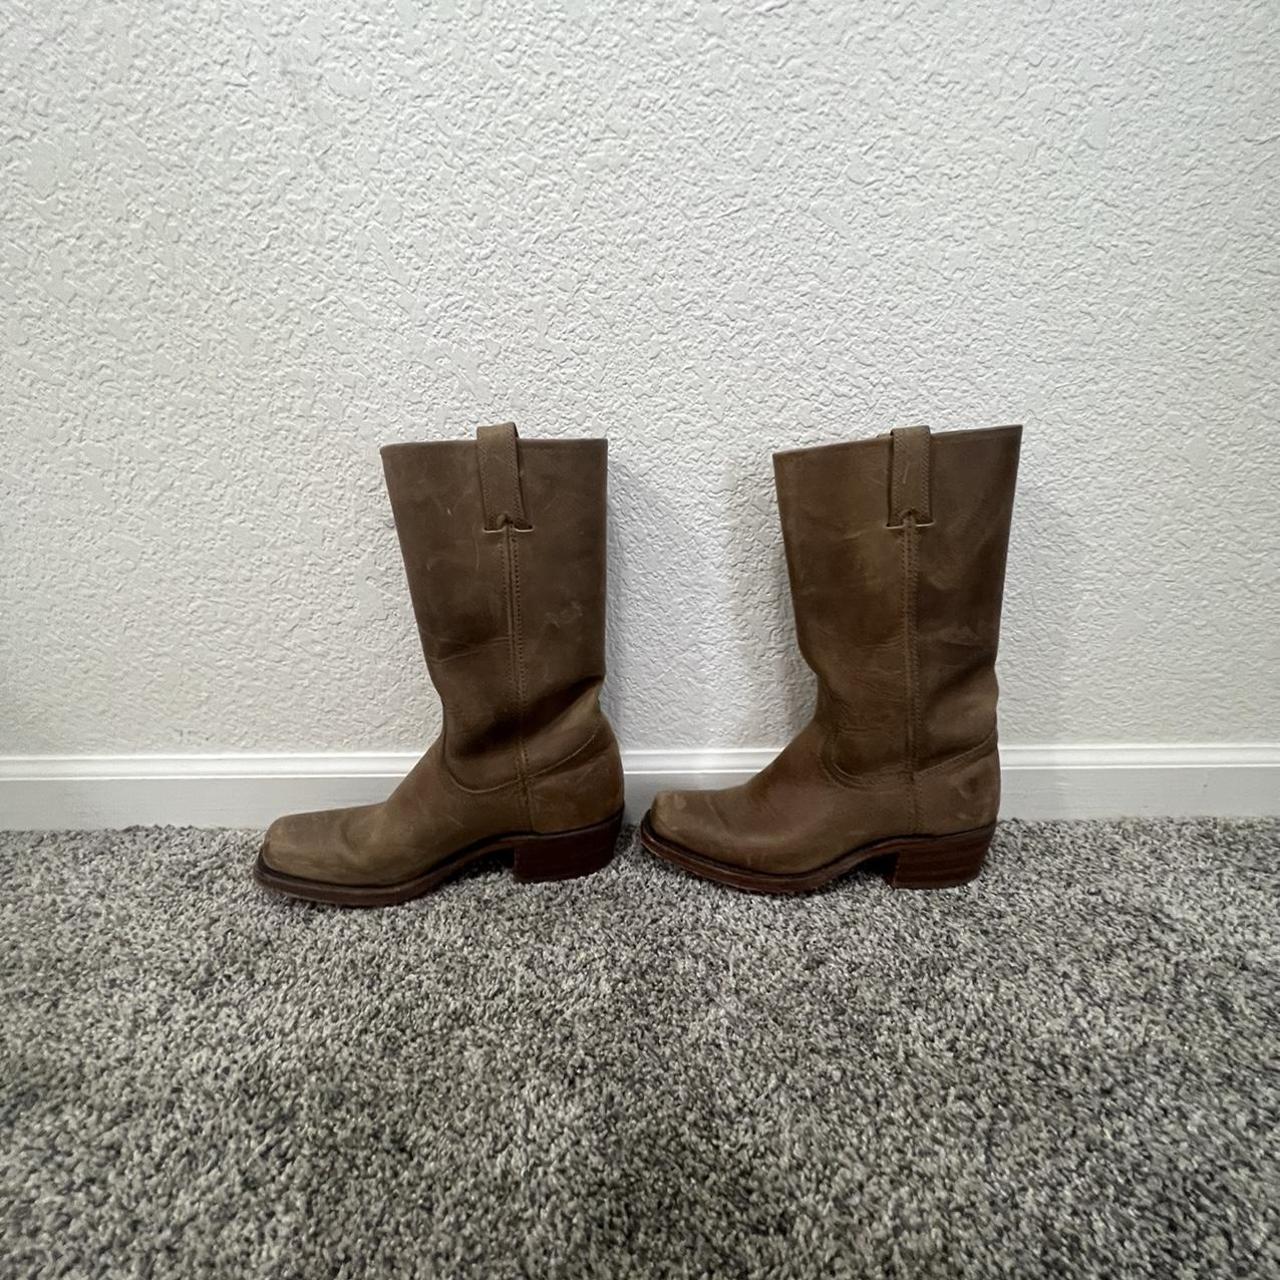 Frye Women's Tan and Brown Boots (2)